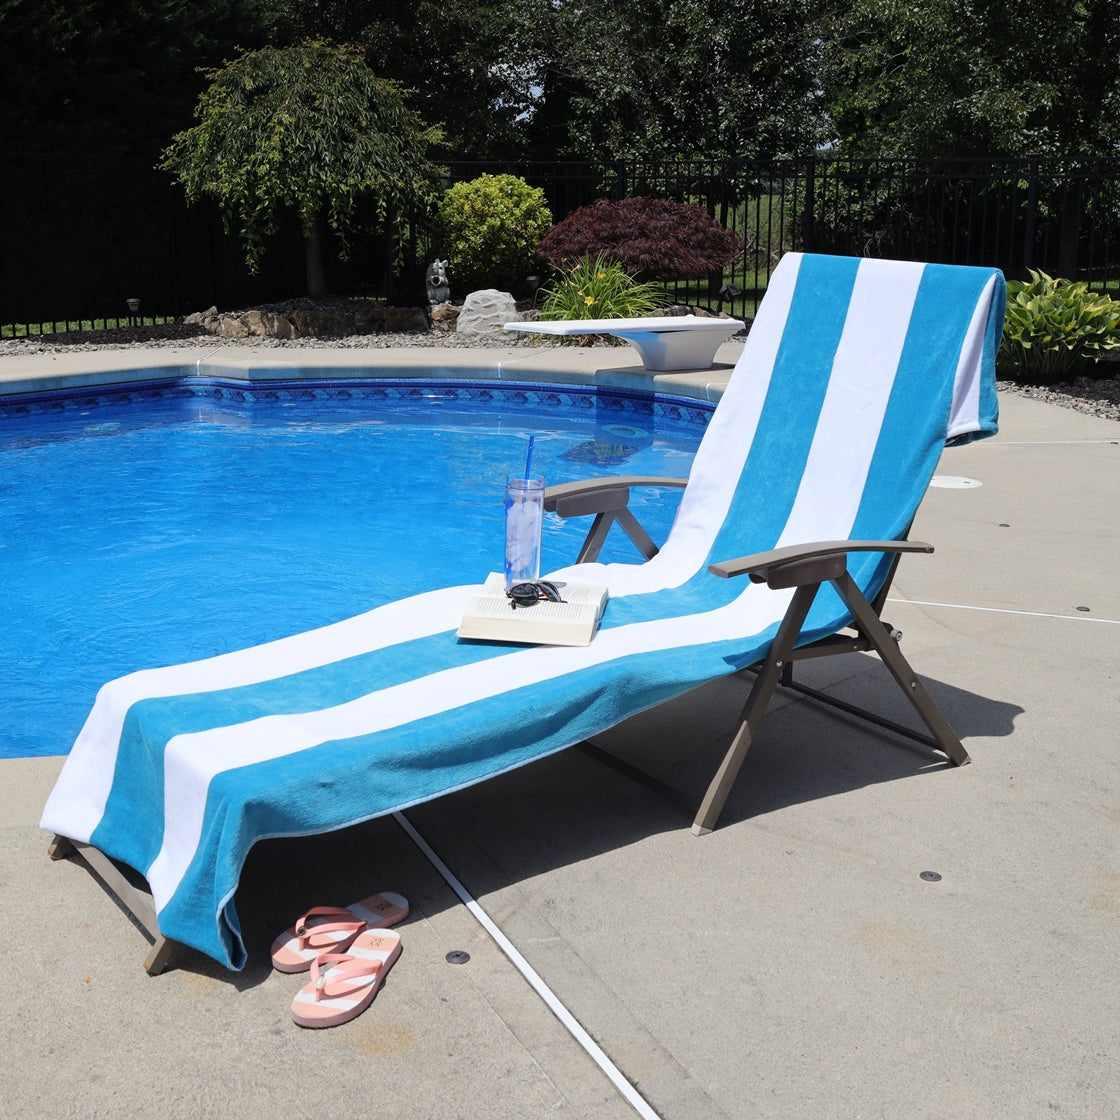 Superior Cotton Standard Size Cabana Stripe Chaise Lounge Chair Cover - Turquoise